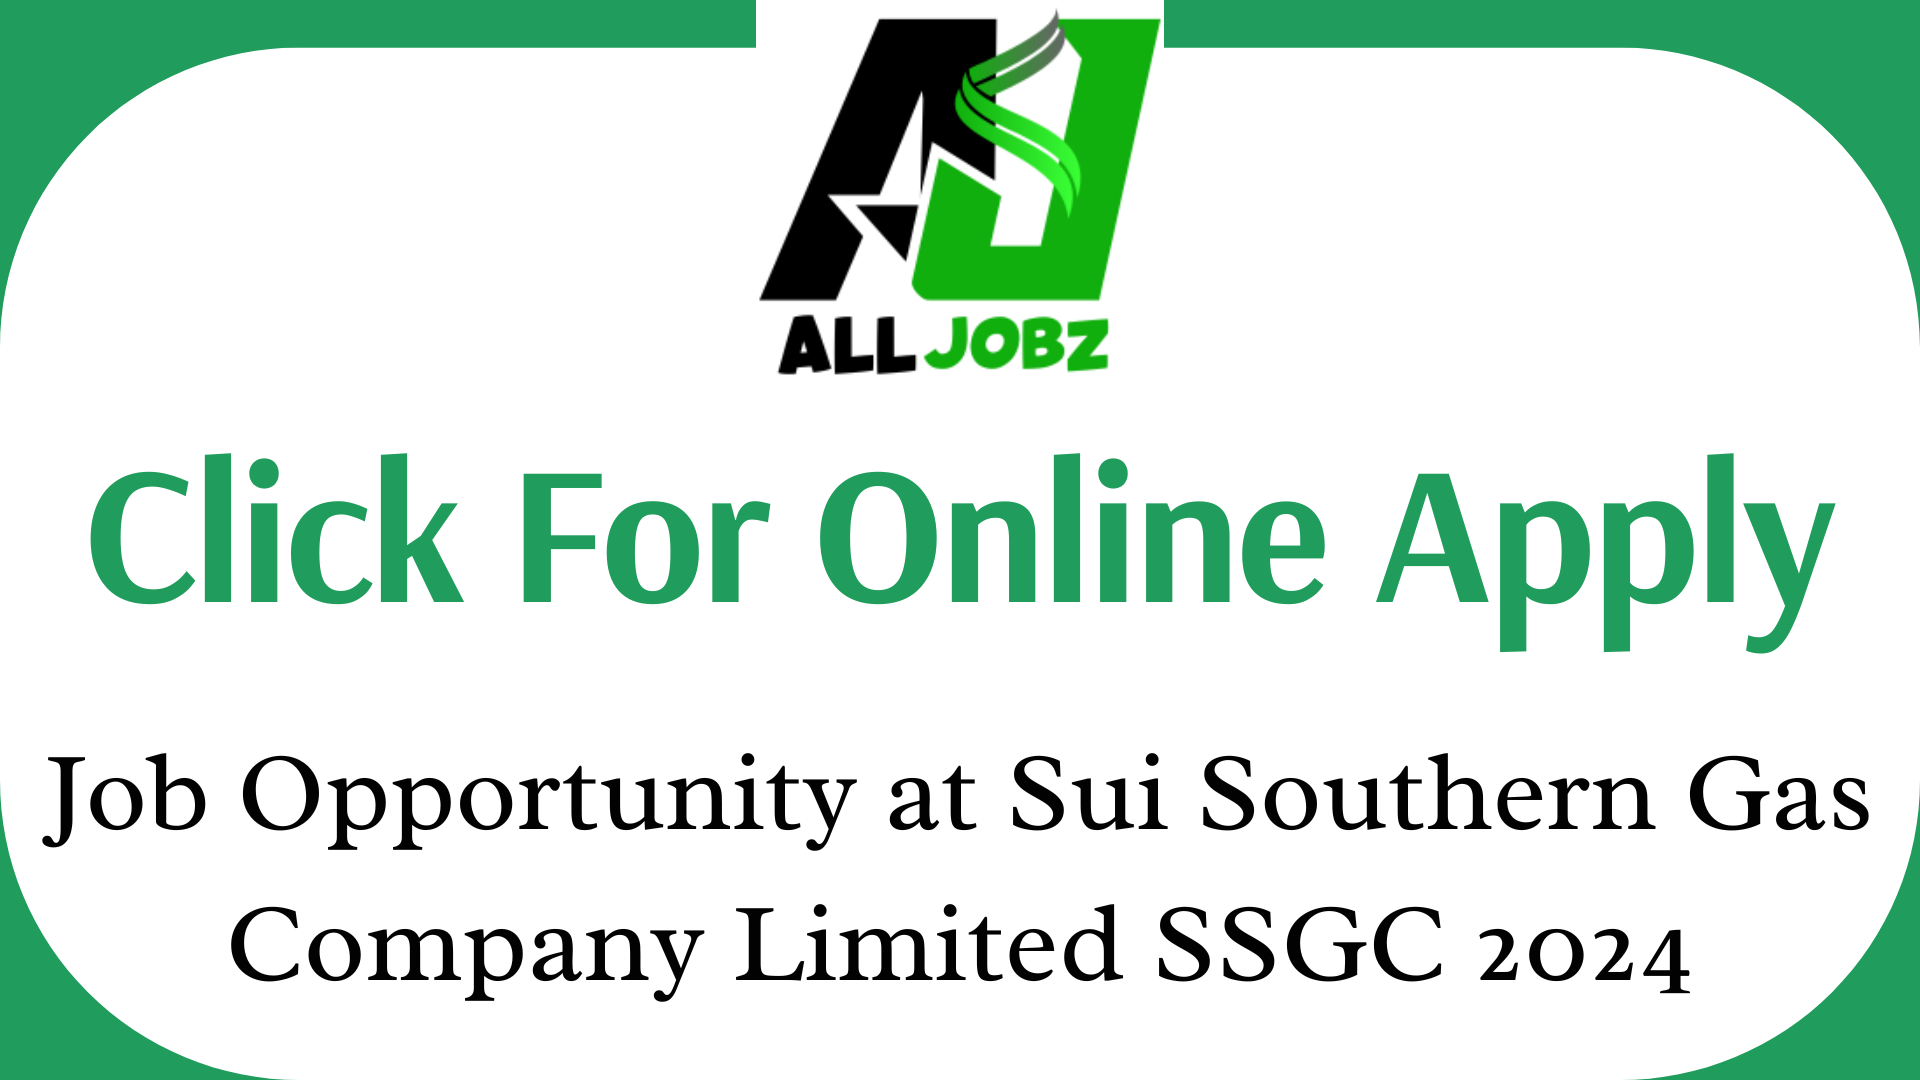 Job Opportunity At Sui Southern Gas Company Limited Ssgc, Sui Southern Gas Company Limited Ssgc Jobs Online, Ssgc Jobs Online Apply, Sui Southern Gas Company Limited Ssgc Jobs Near, Sui Southern Gas Company Jobs 2024, Ssgc Careers Login, Ssgc Duplicate Bill, Ssgc Jobs 2024 Online Apply, Sui Southern Gas Company Limited Ssgc Jobs 24024 Salary, Sui Southern Gas Company Limited Ssgc Jobs 24024 Online, Sui Southern Gas Company Limited Ssgc Jobs 24024 Login, Sui Gas Job Application Form Online Apply, Sui Gas Jobs 2024 Online Apply, Sui Gas Jobs In Pakistan,